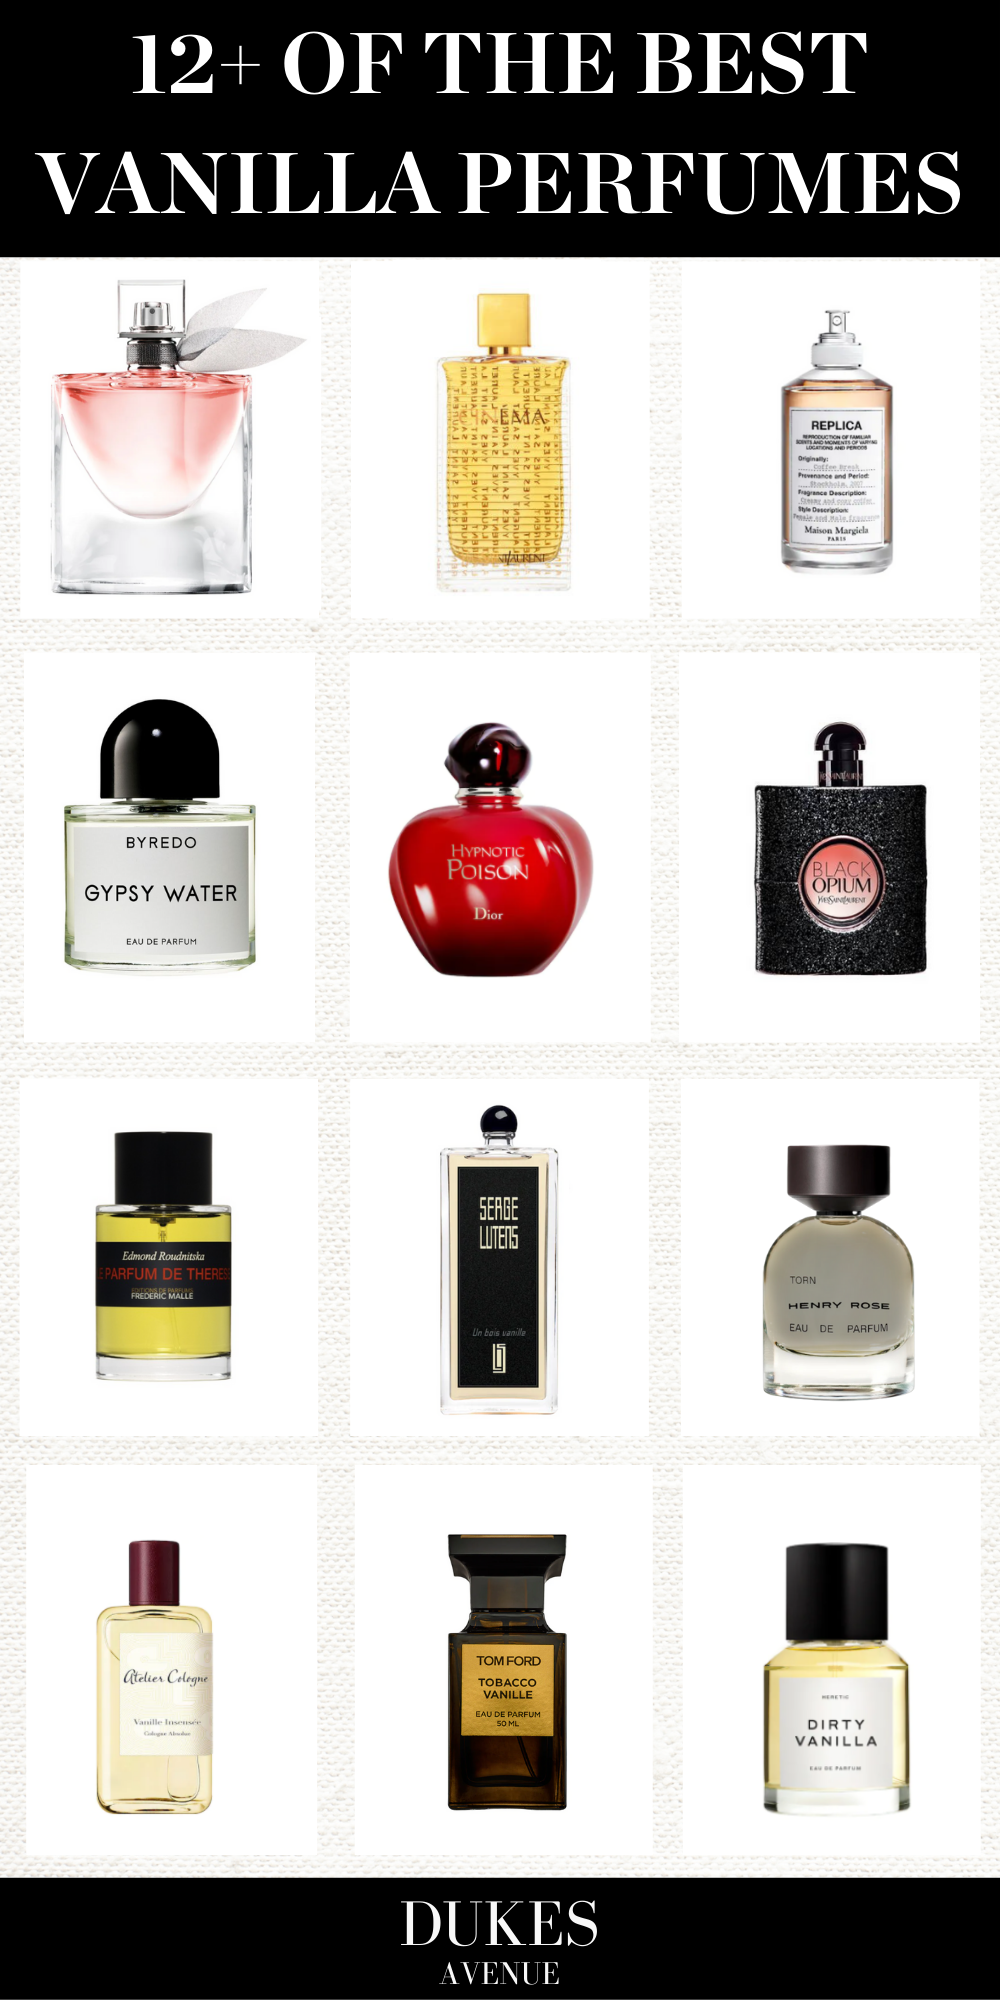 Pictures of the 12 Best Vanilla Perfumes this Season against a canvas background